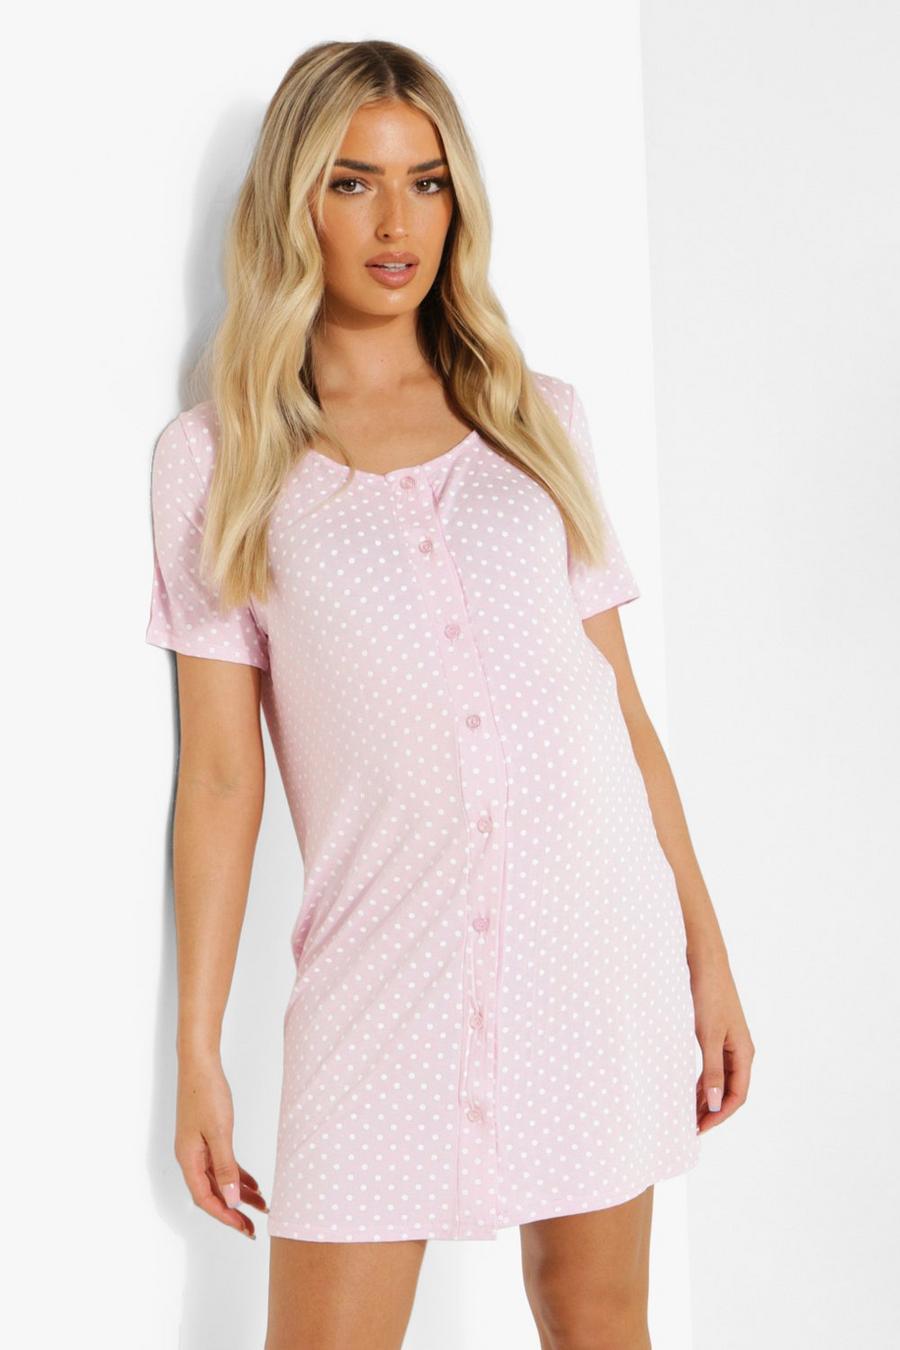 Baby pink Maternity Polka Dot Button Front Nightgown